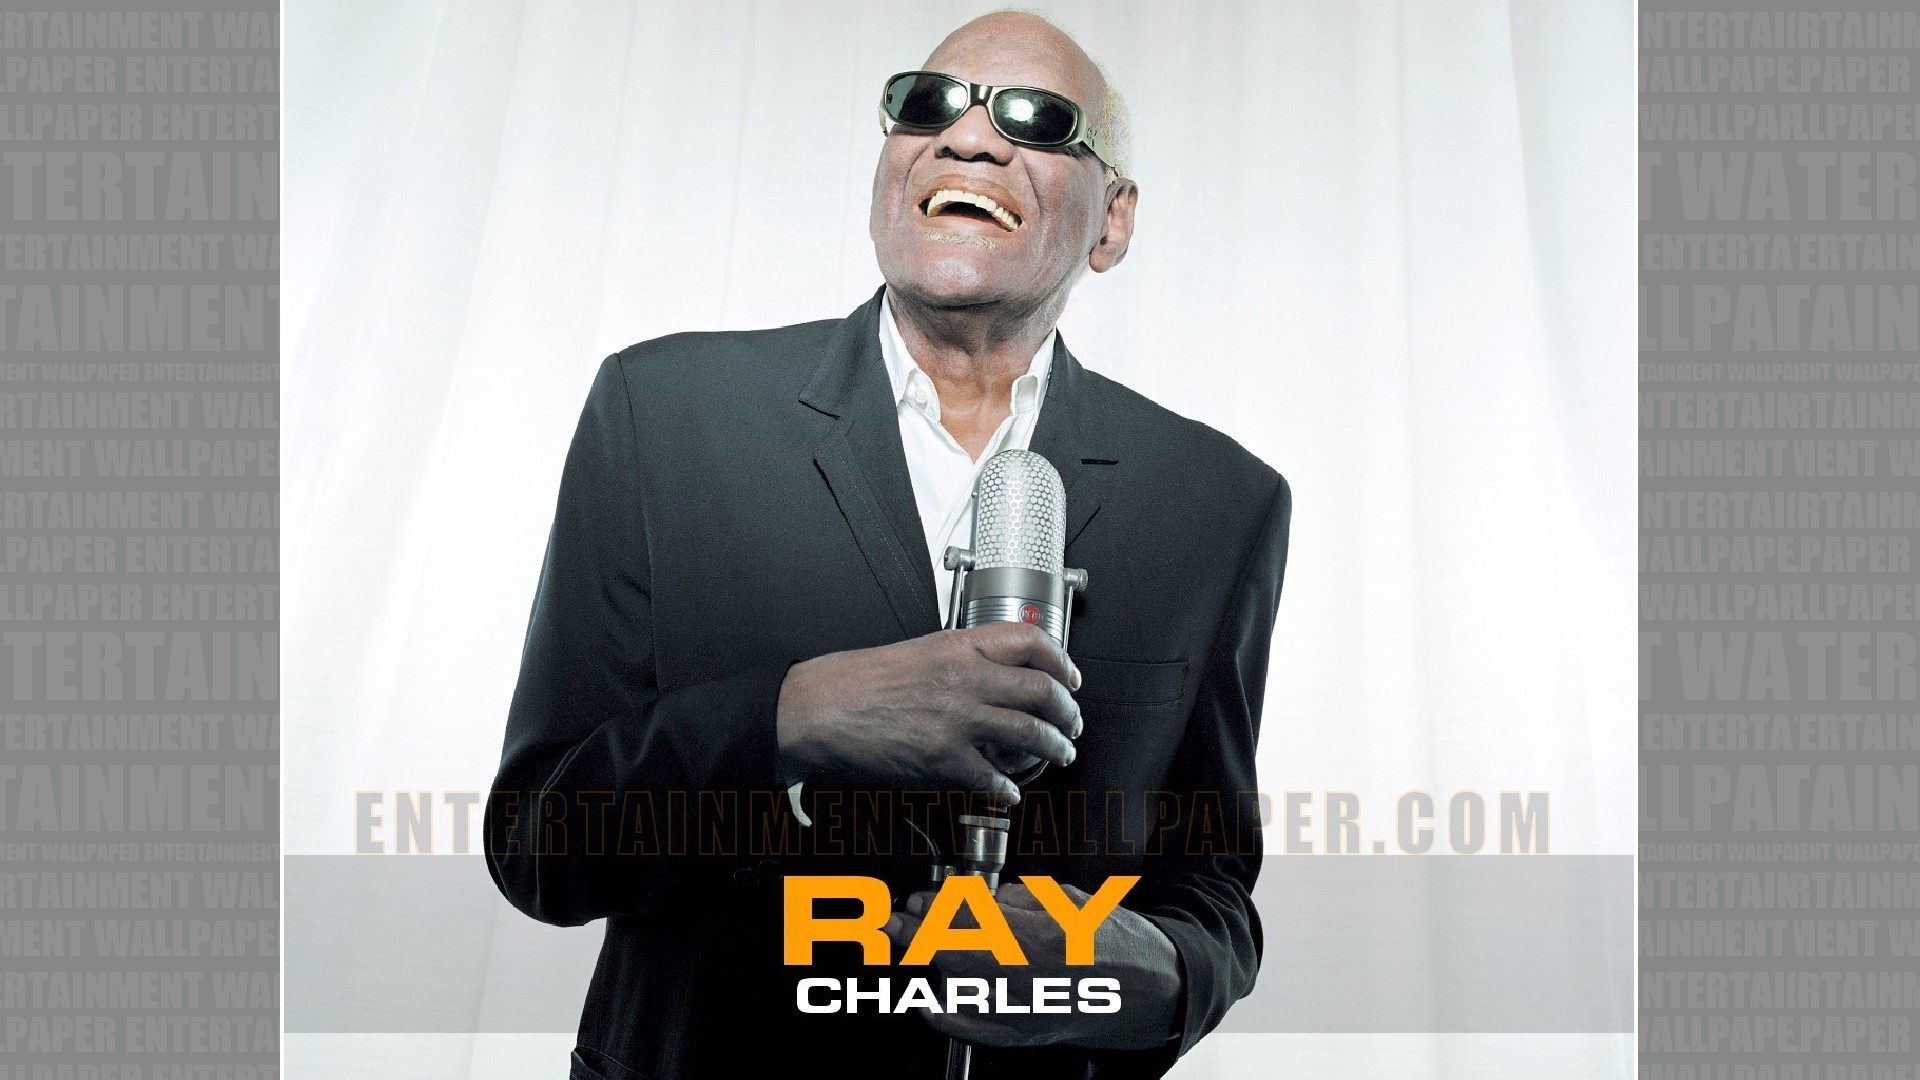 Ray Charles Wallpaper - Original size, download now.